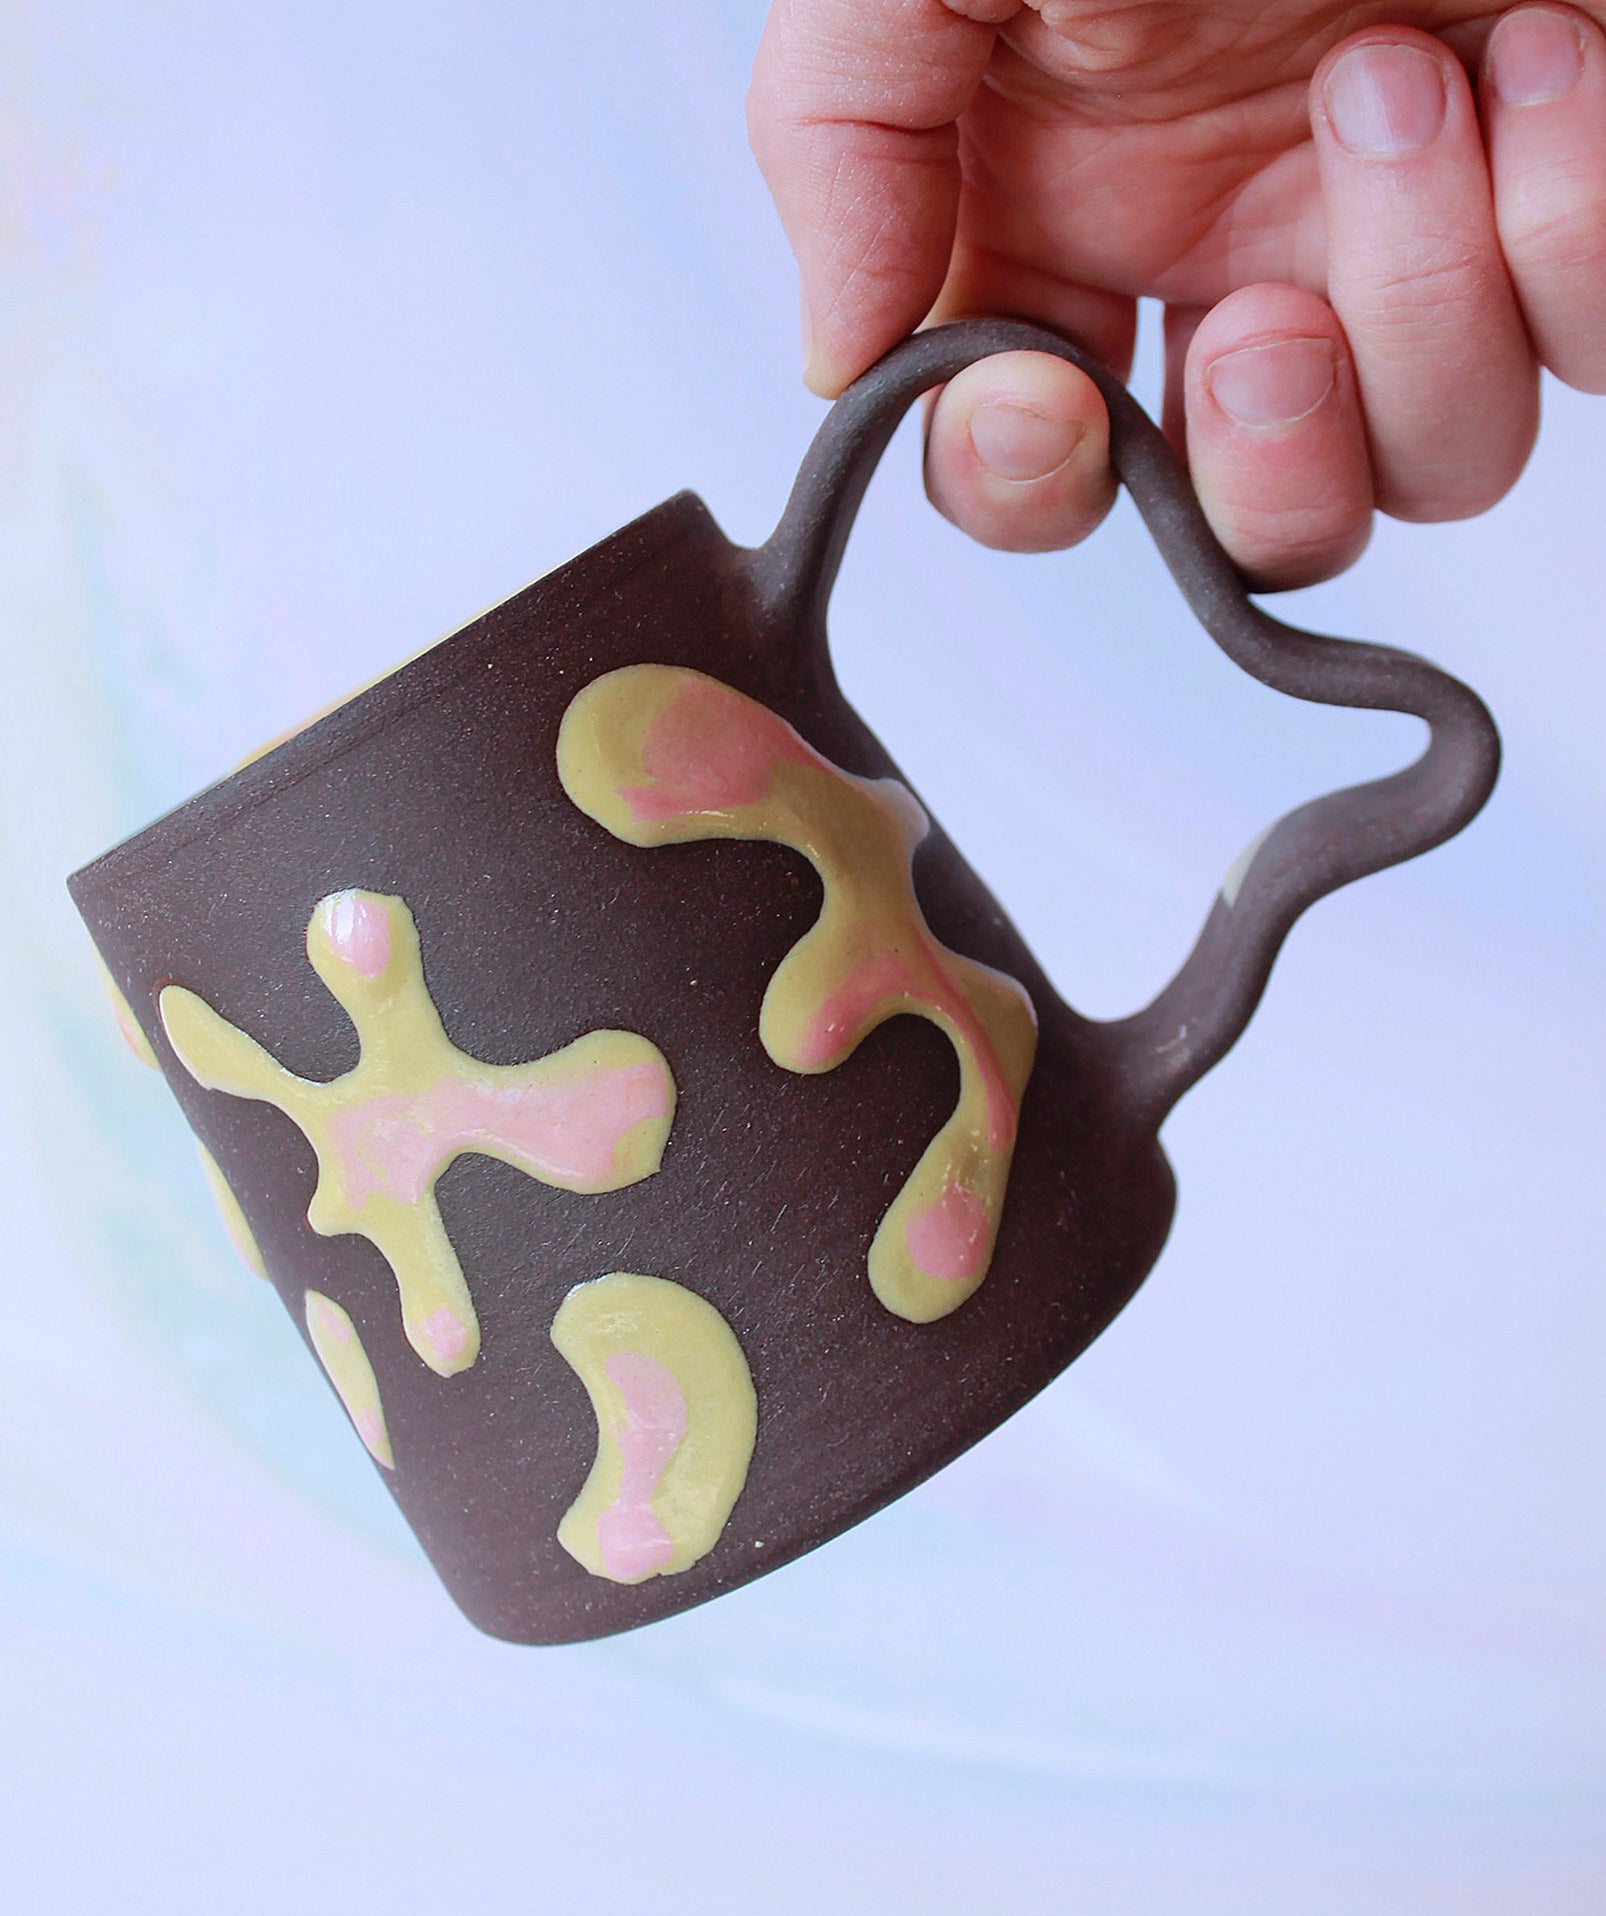 a person holding the psychedelic mug by its handle